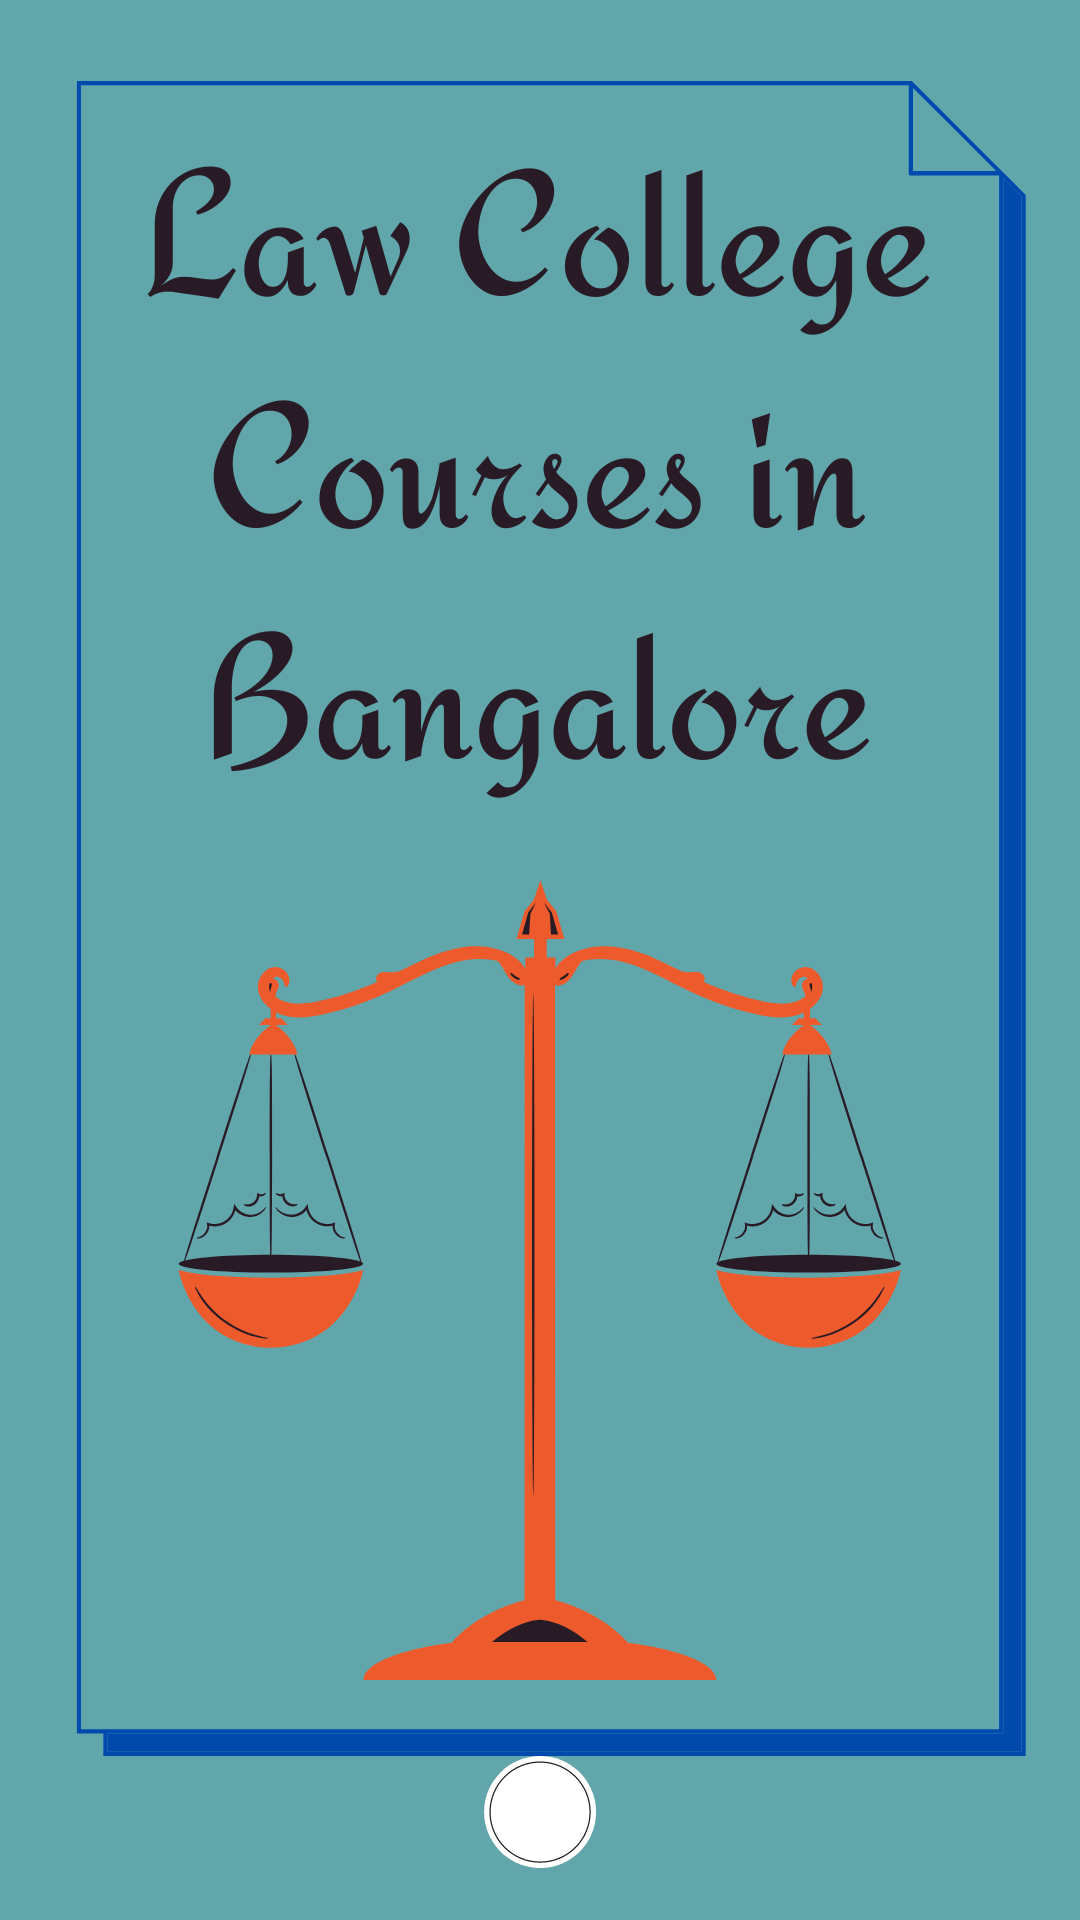 Law College Courses in Bangalore